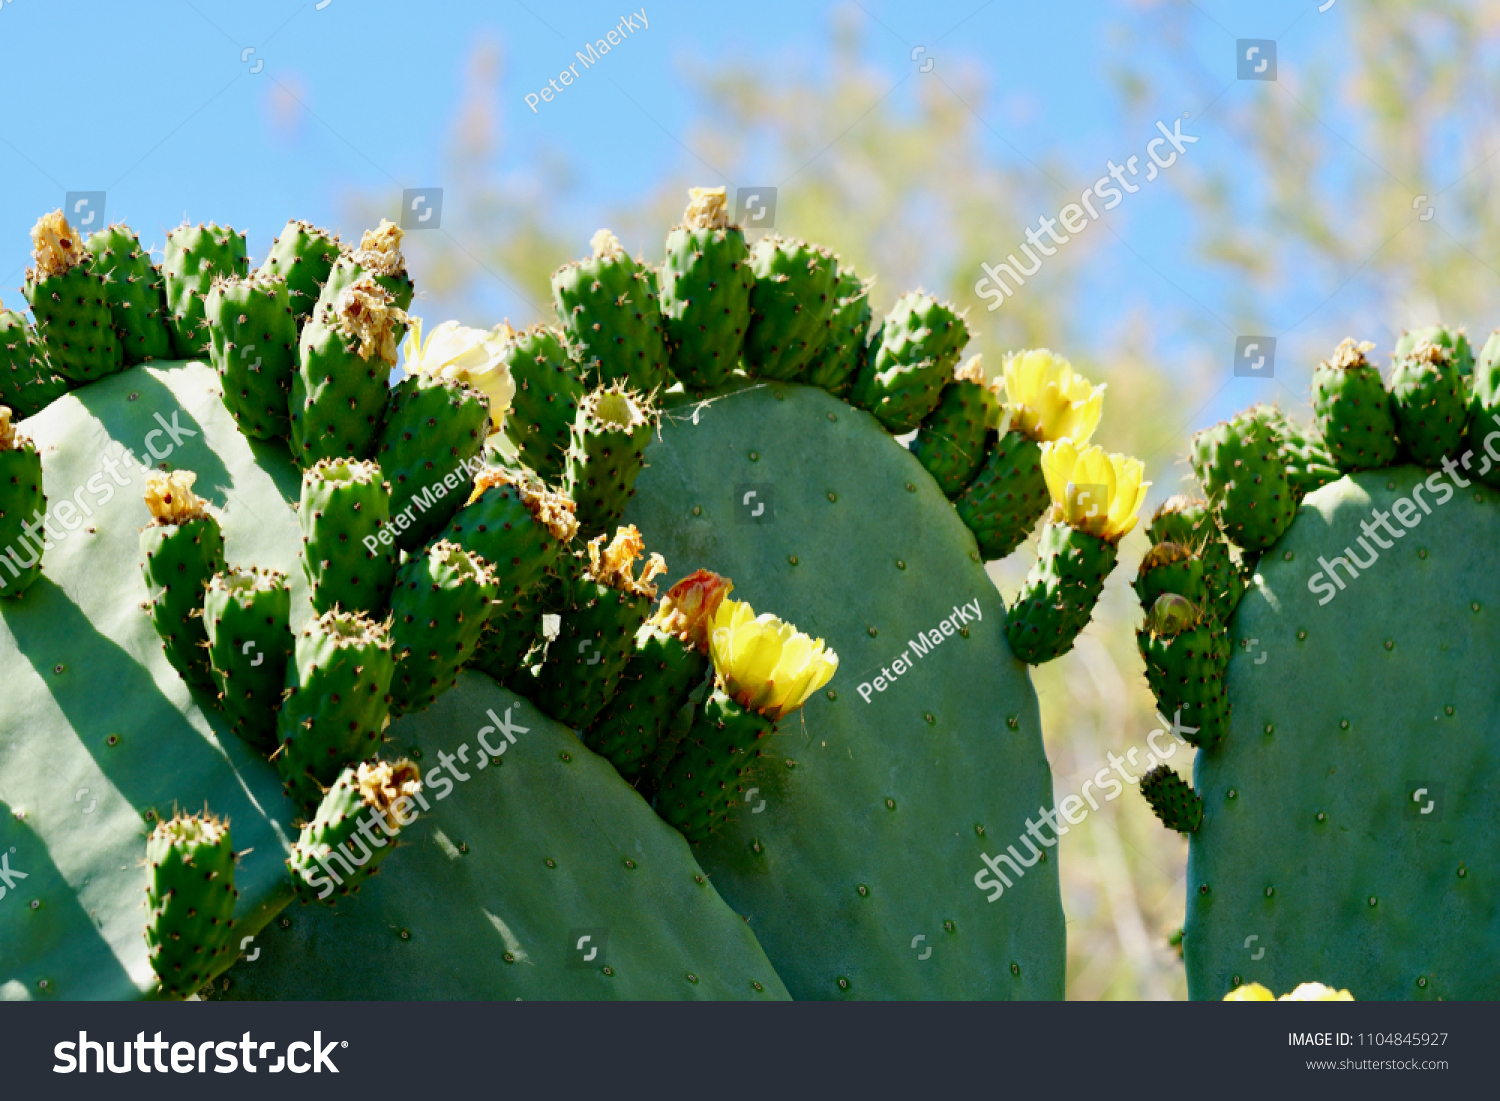 Purple Prickly Pear Cactus Fruit Blooming Stock Photo Edit Now 1104845927